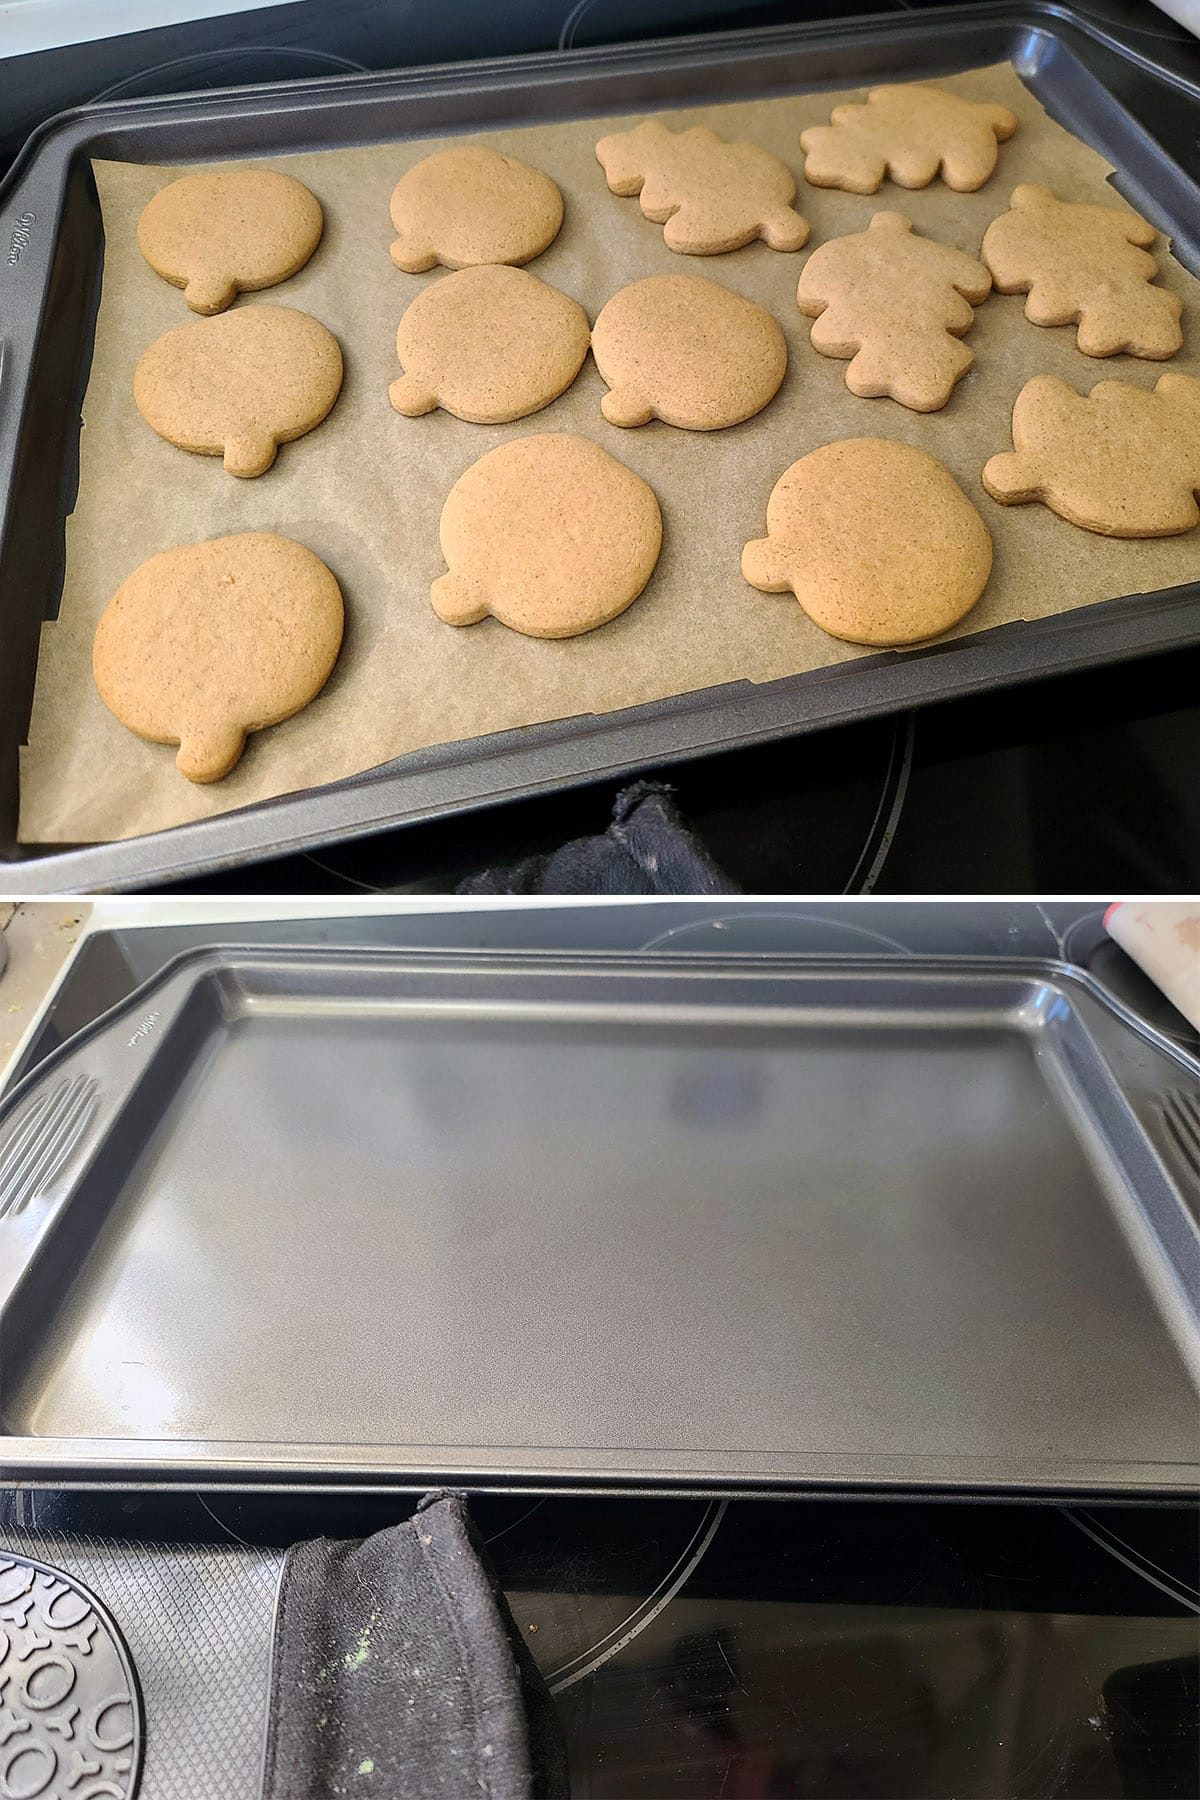 A two part image showing a pan of hot cookies being flattened with a second pan.